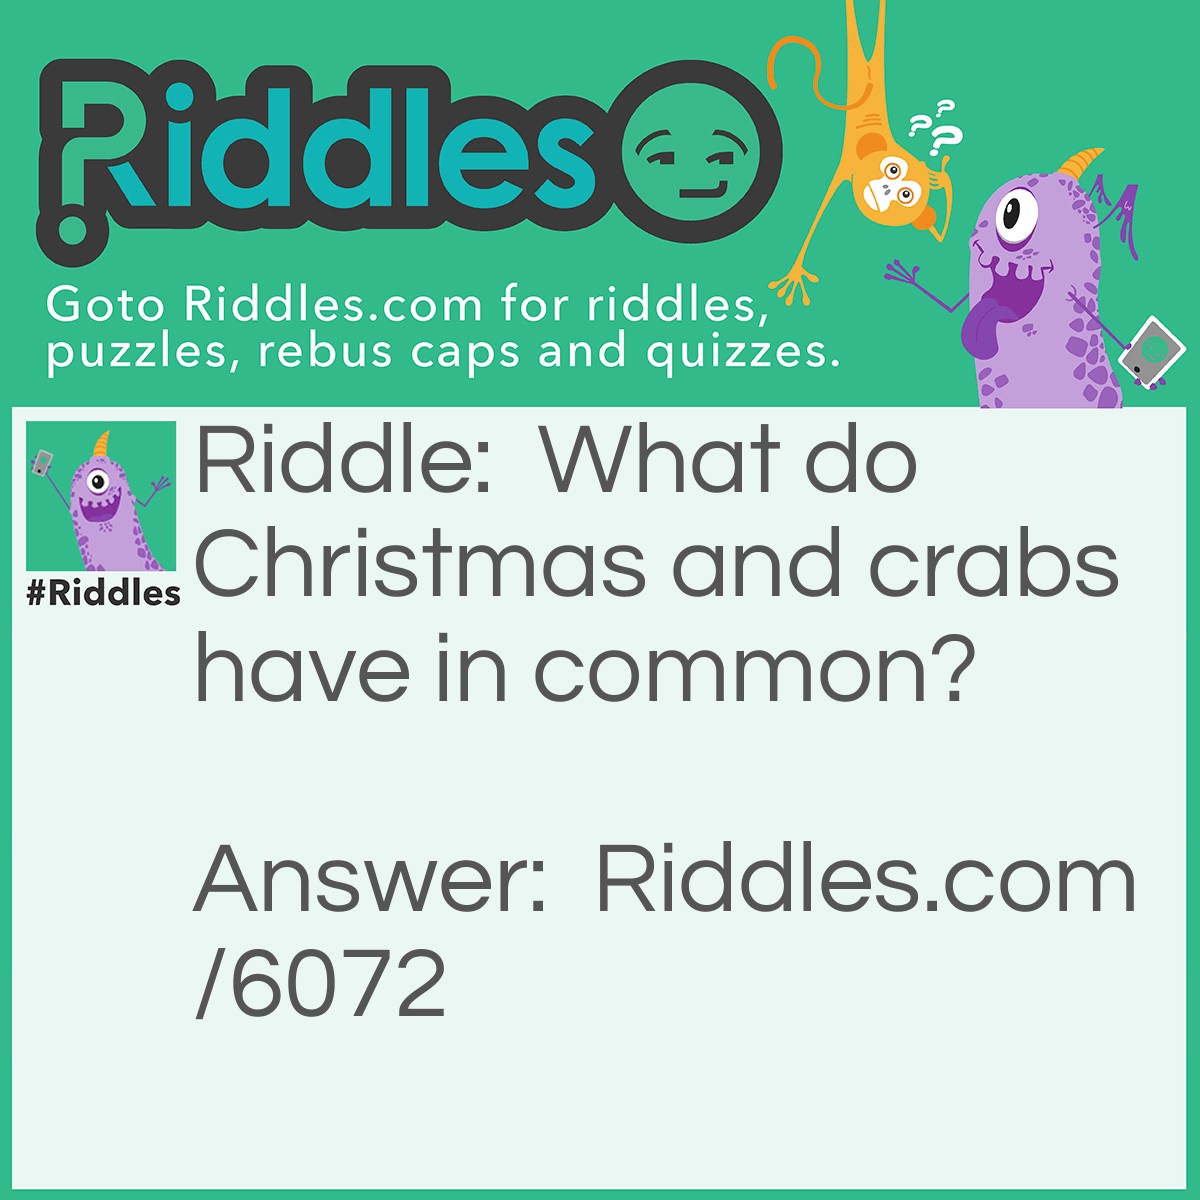 Riddle: What do Christmas and crabs have in common? Answer: Sandy claws.